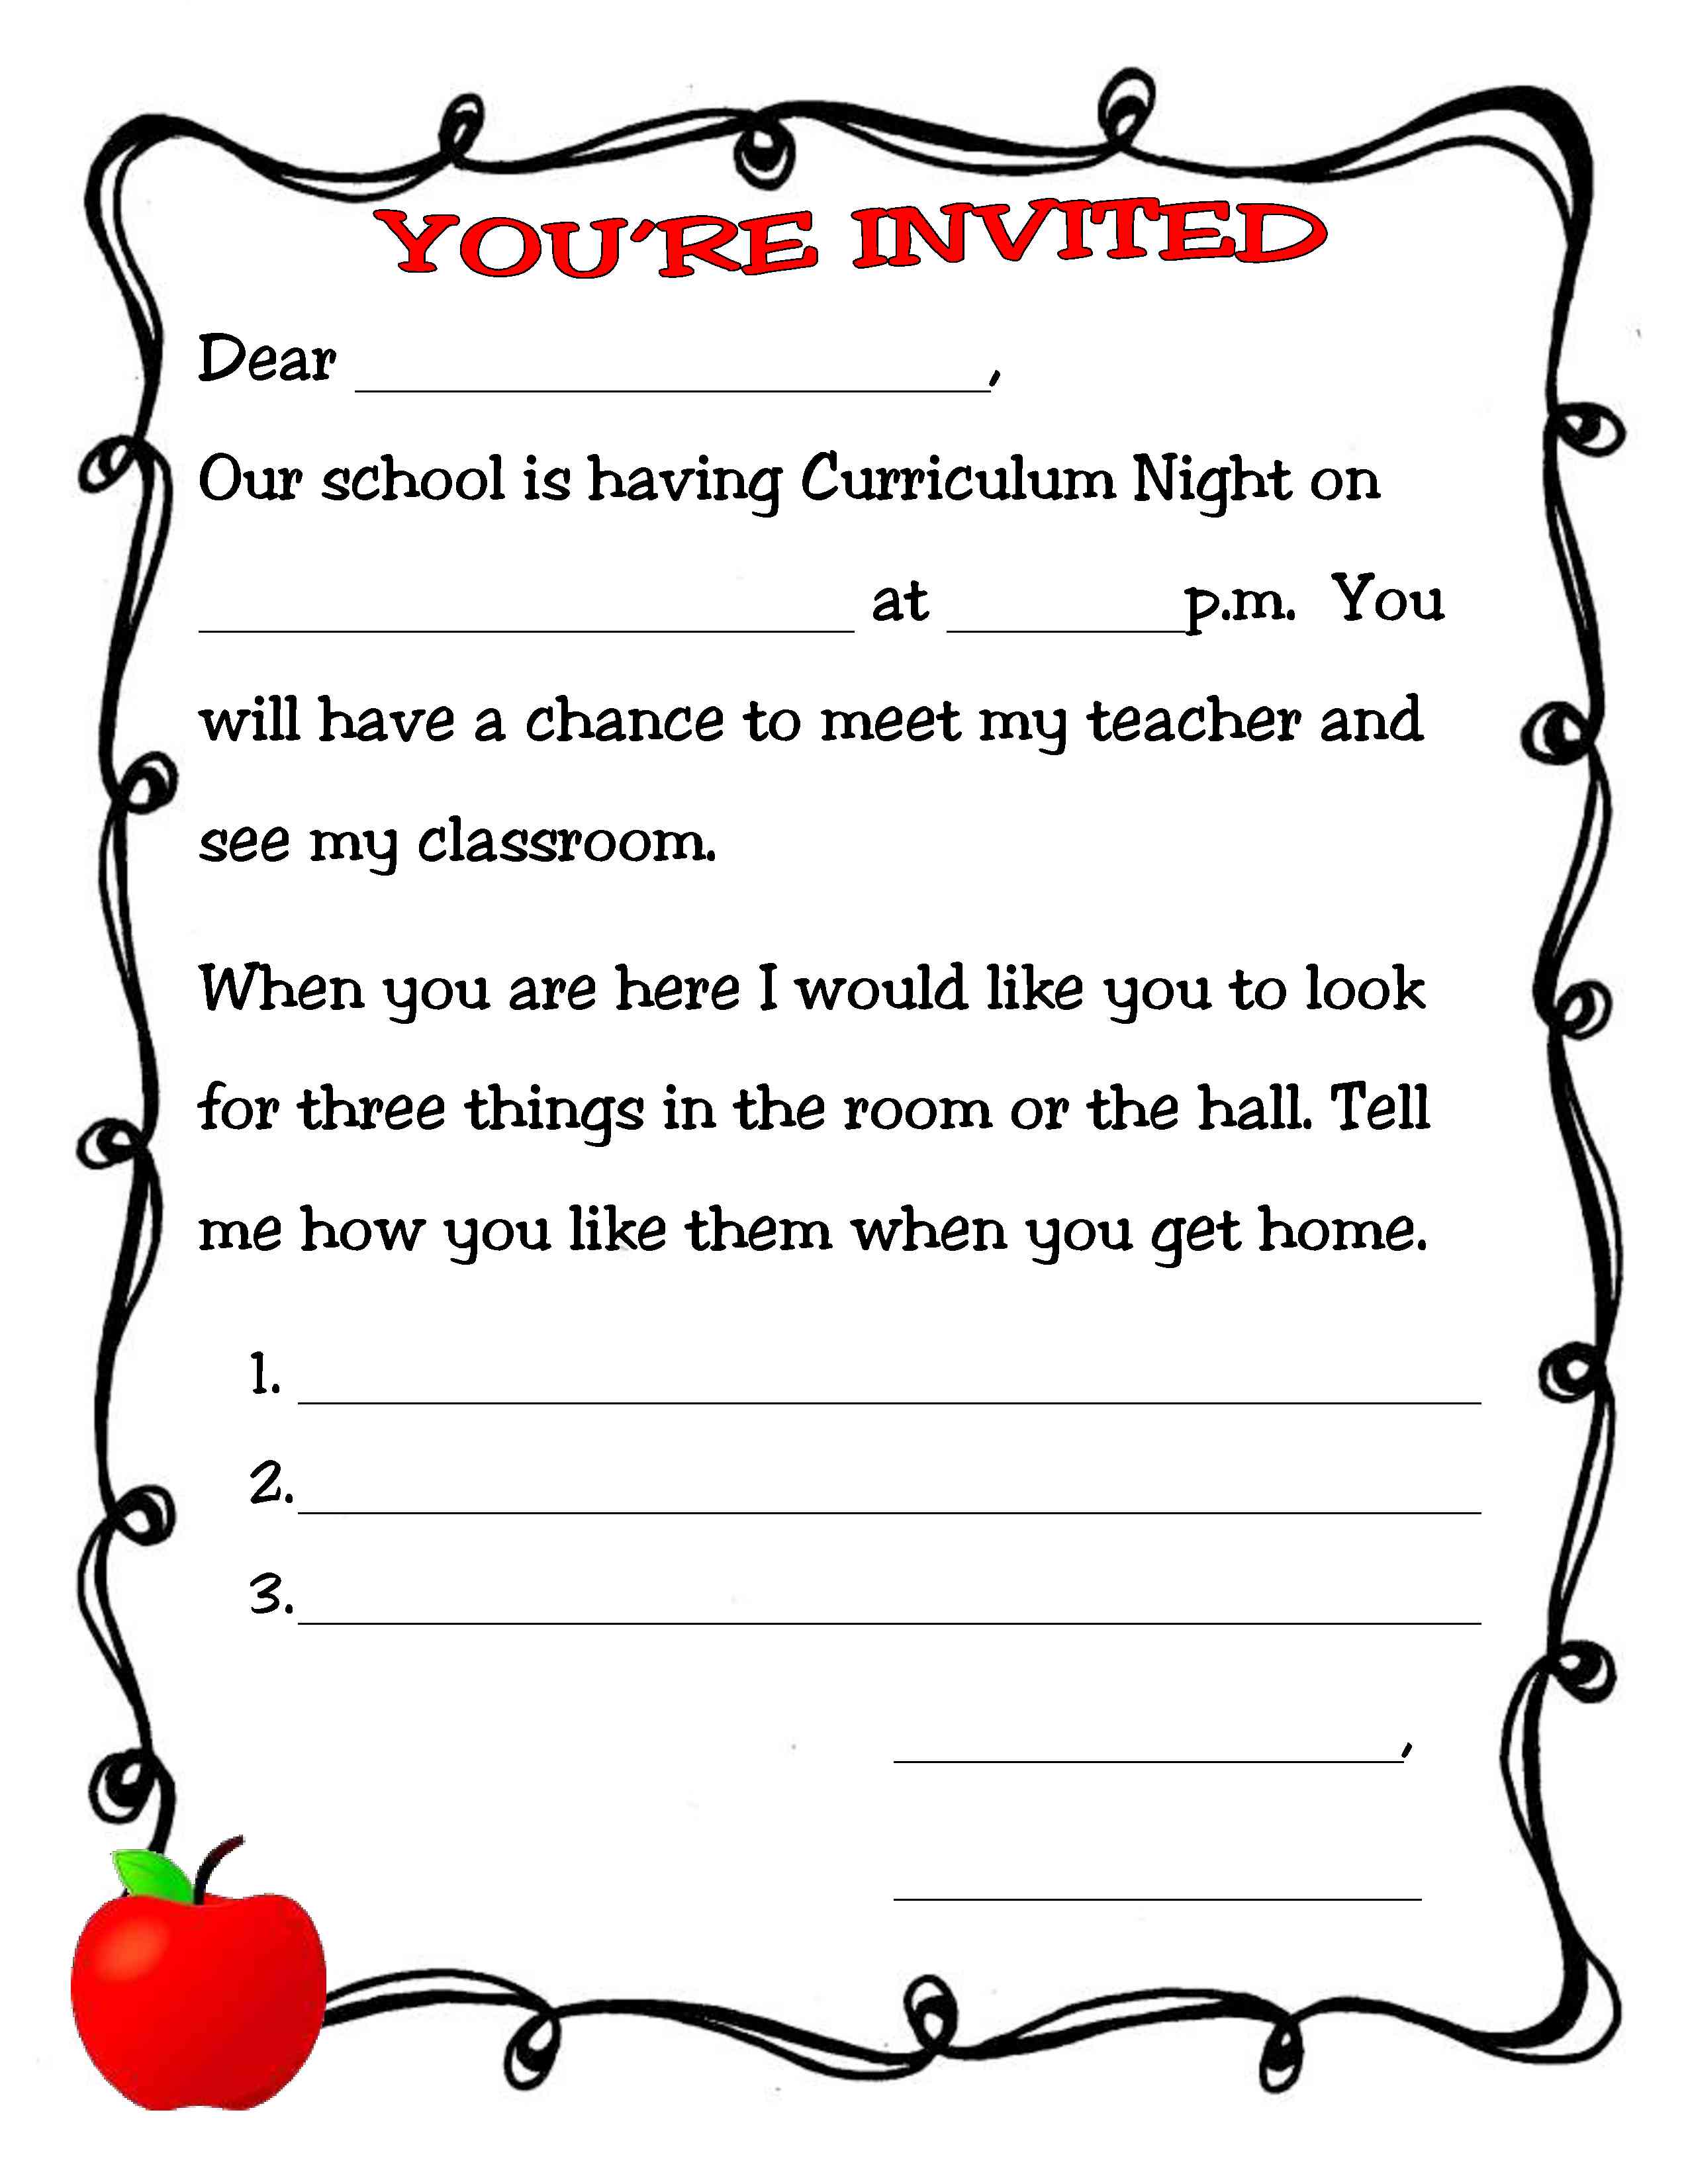 Image result for ideas for student made invite to parent conferences